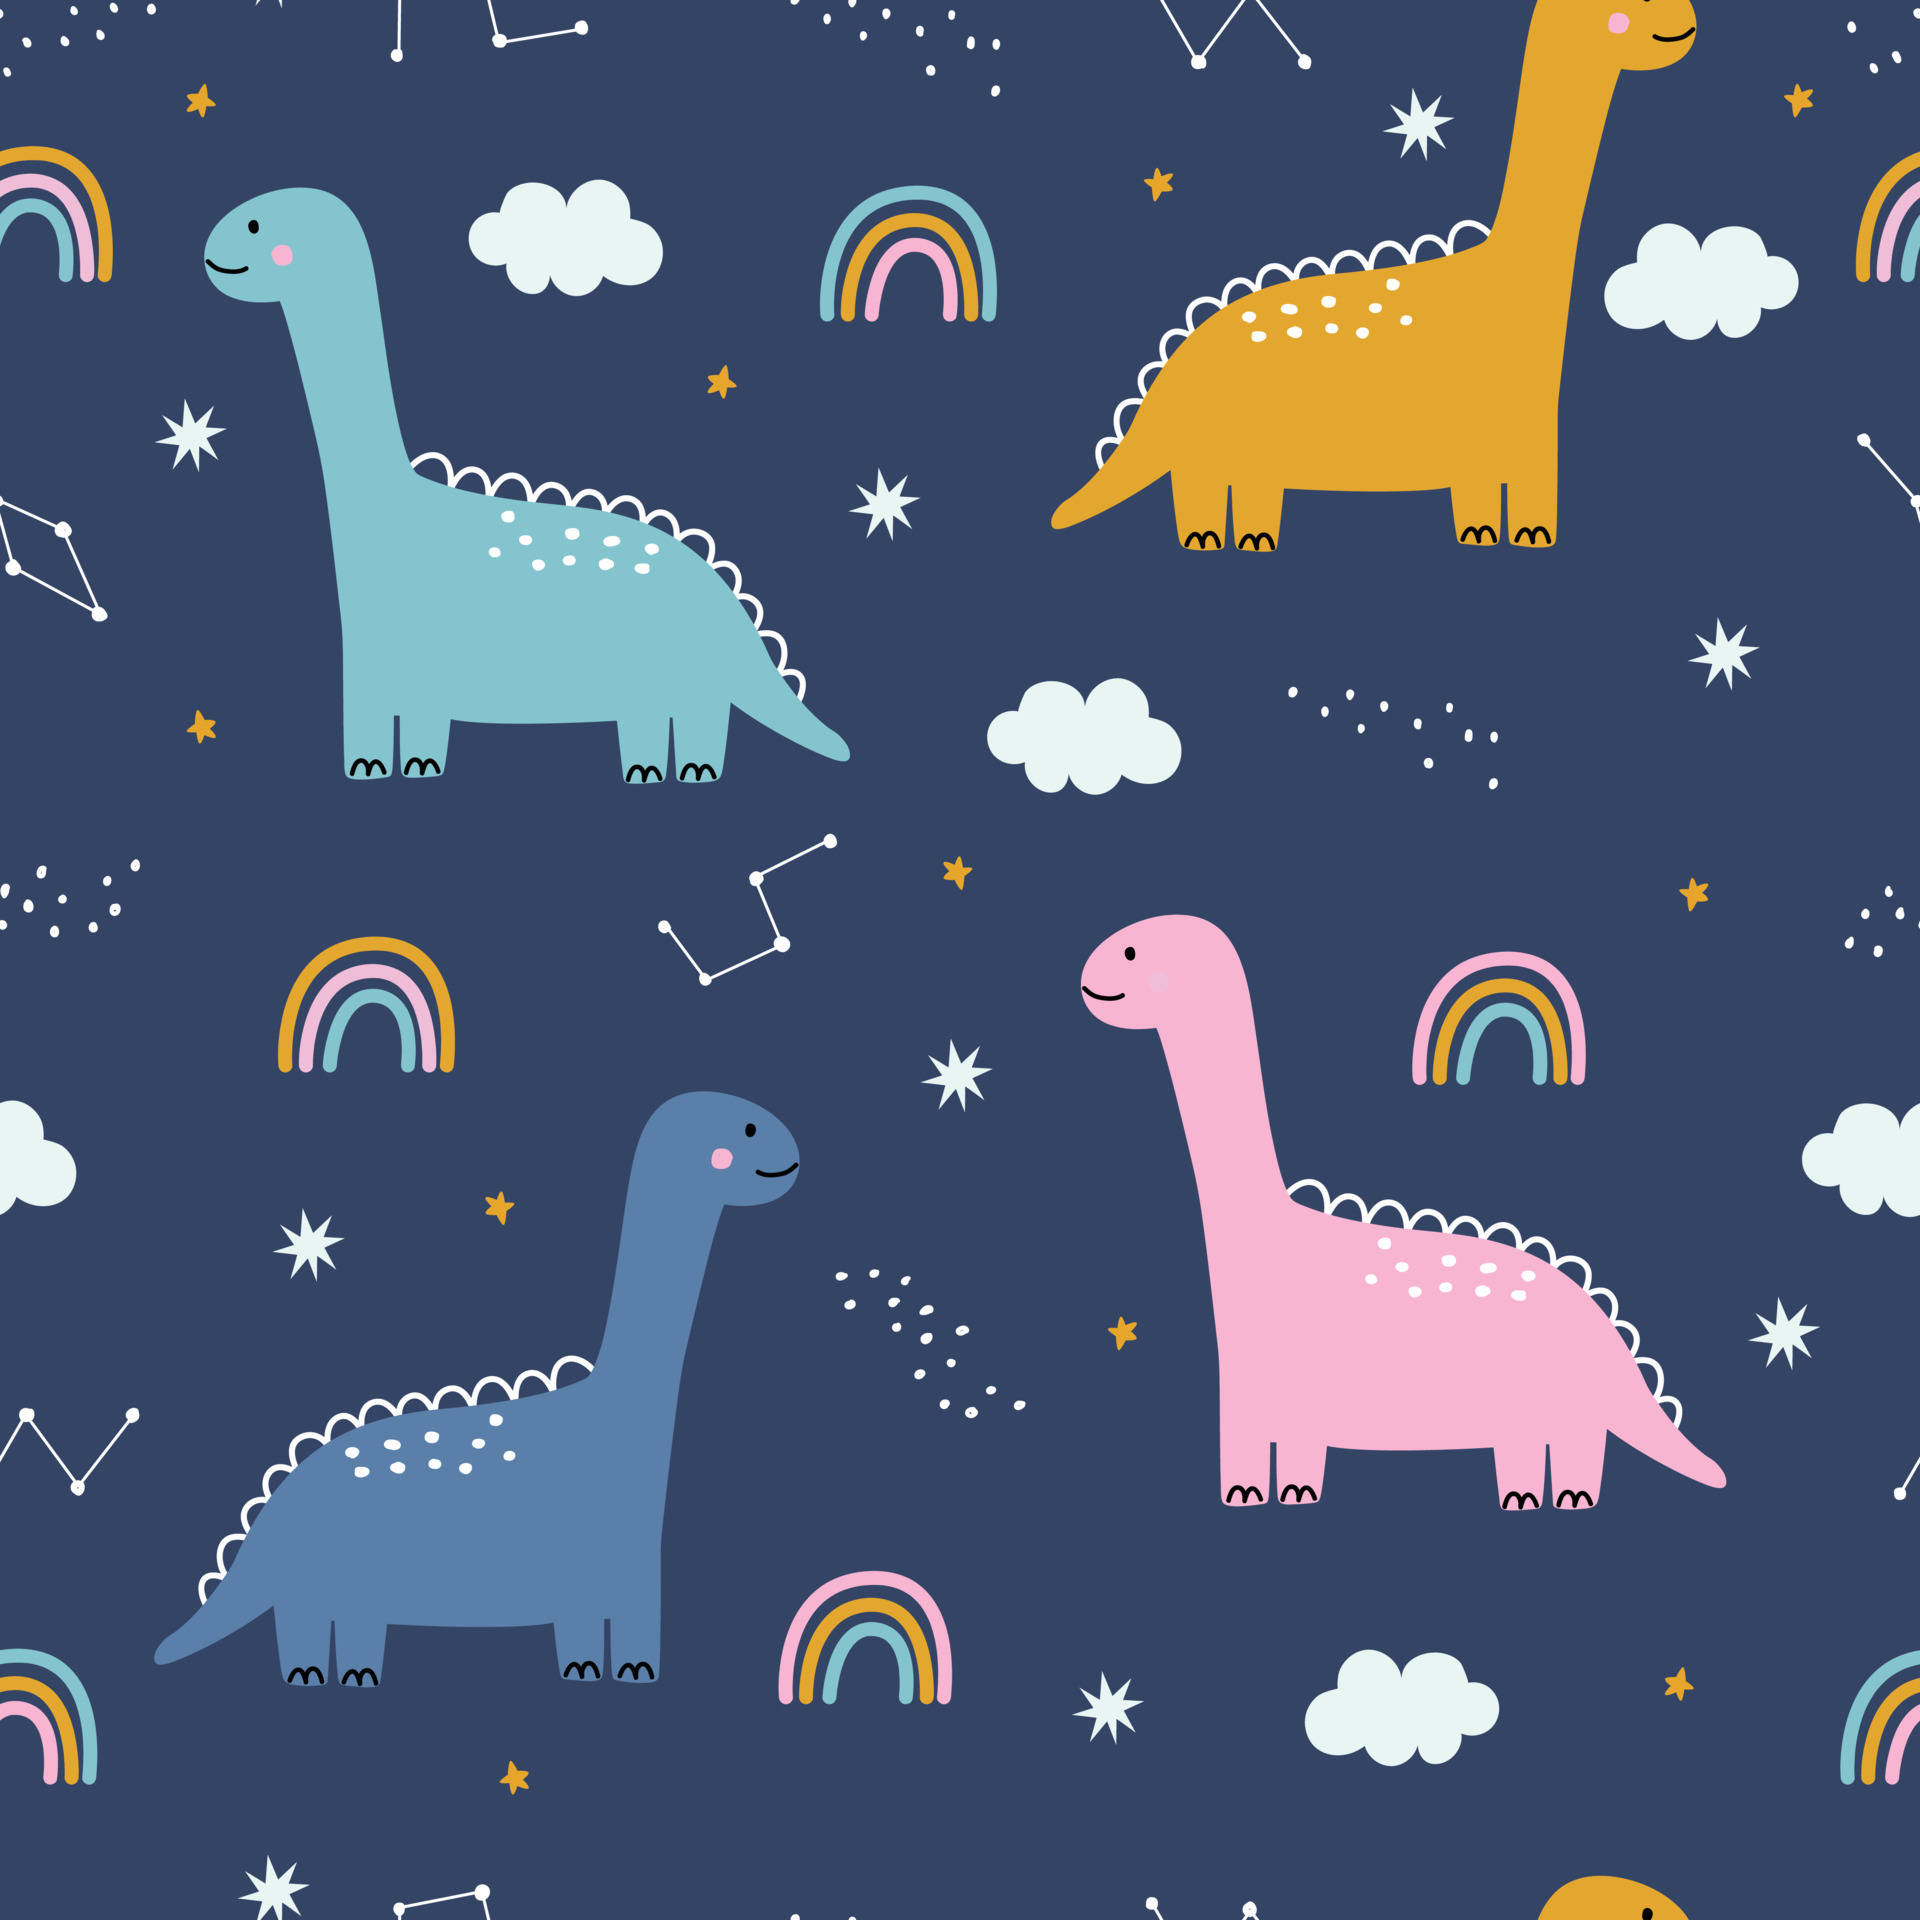 Show your cuteness with this pattern featuring an adorable dinosaur. Wallpaper